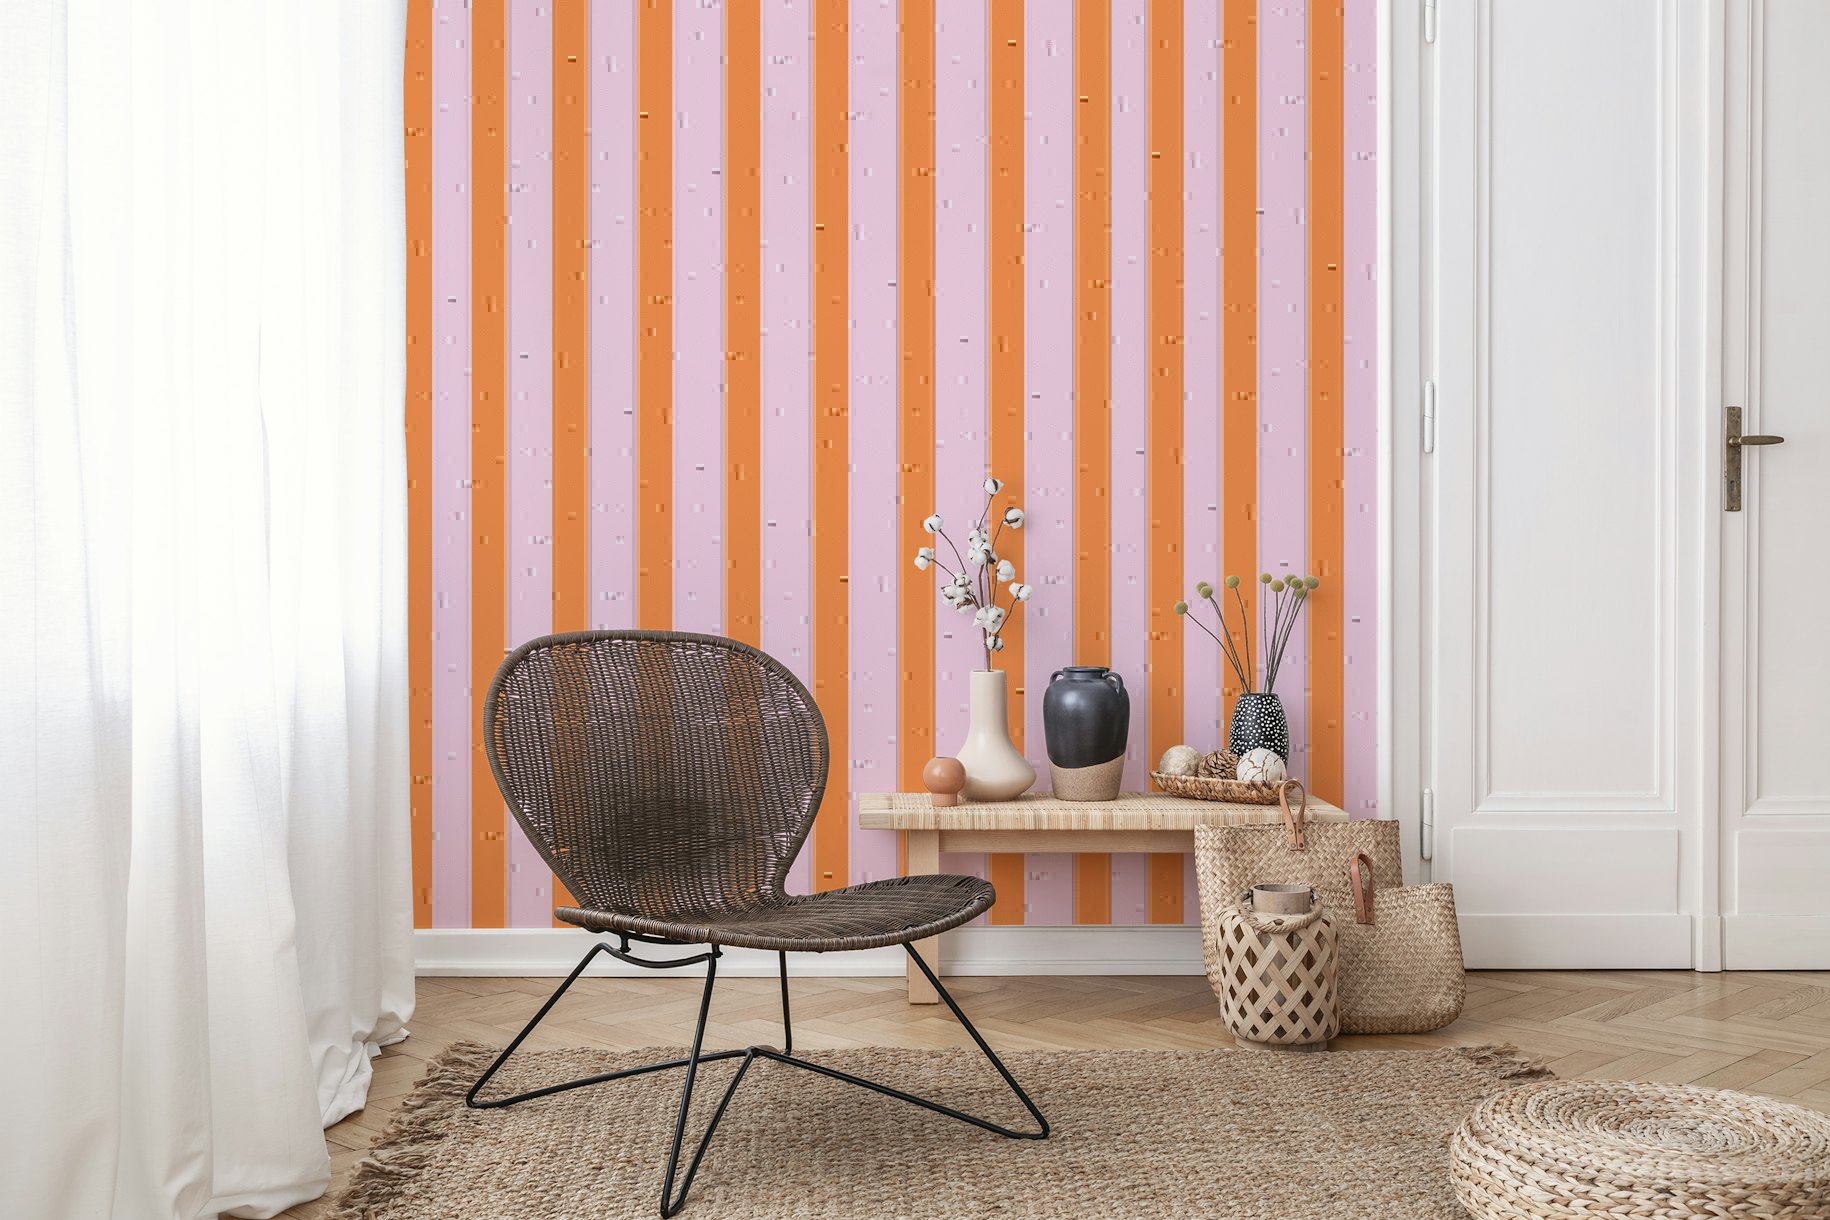 Vibrant Pink and Orange Stripes Wall Mural Design